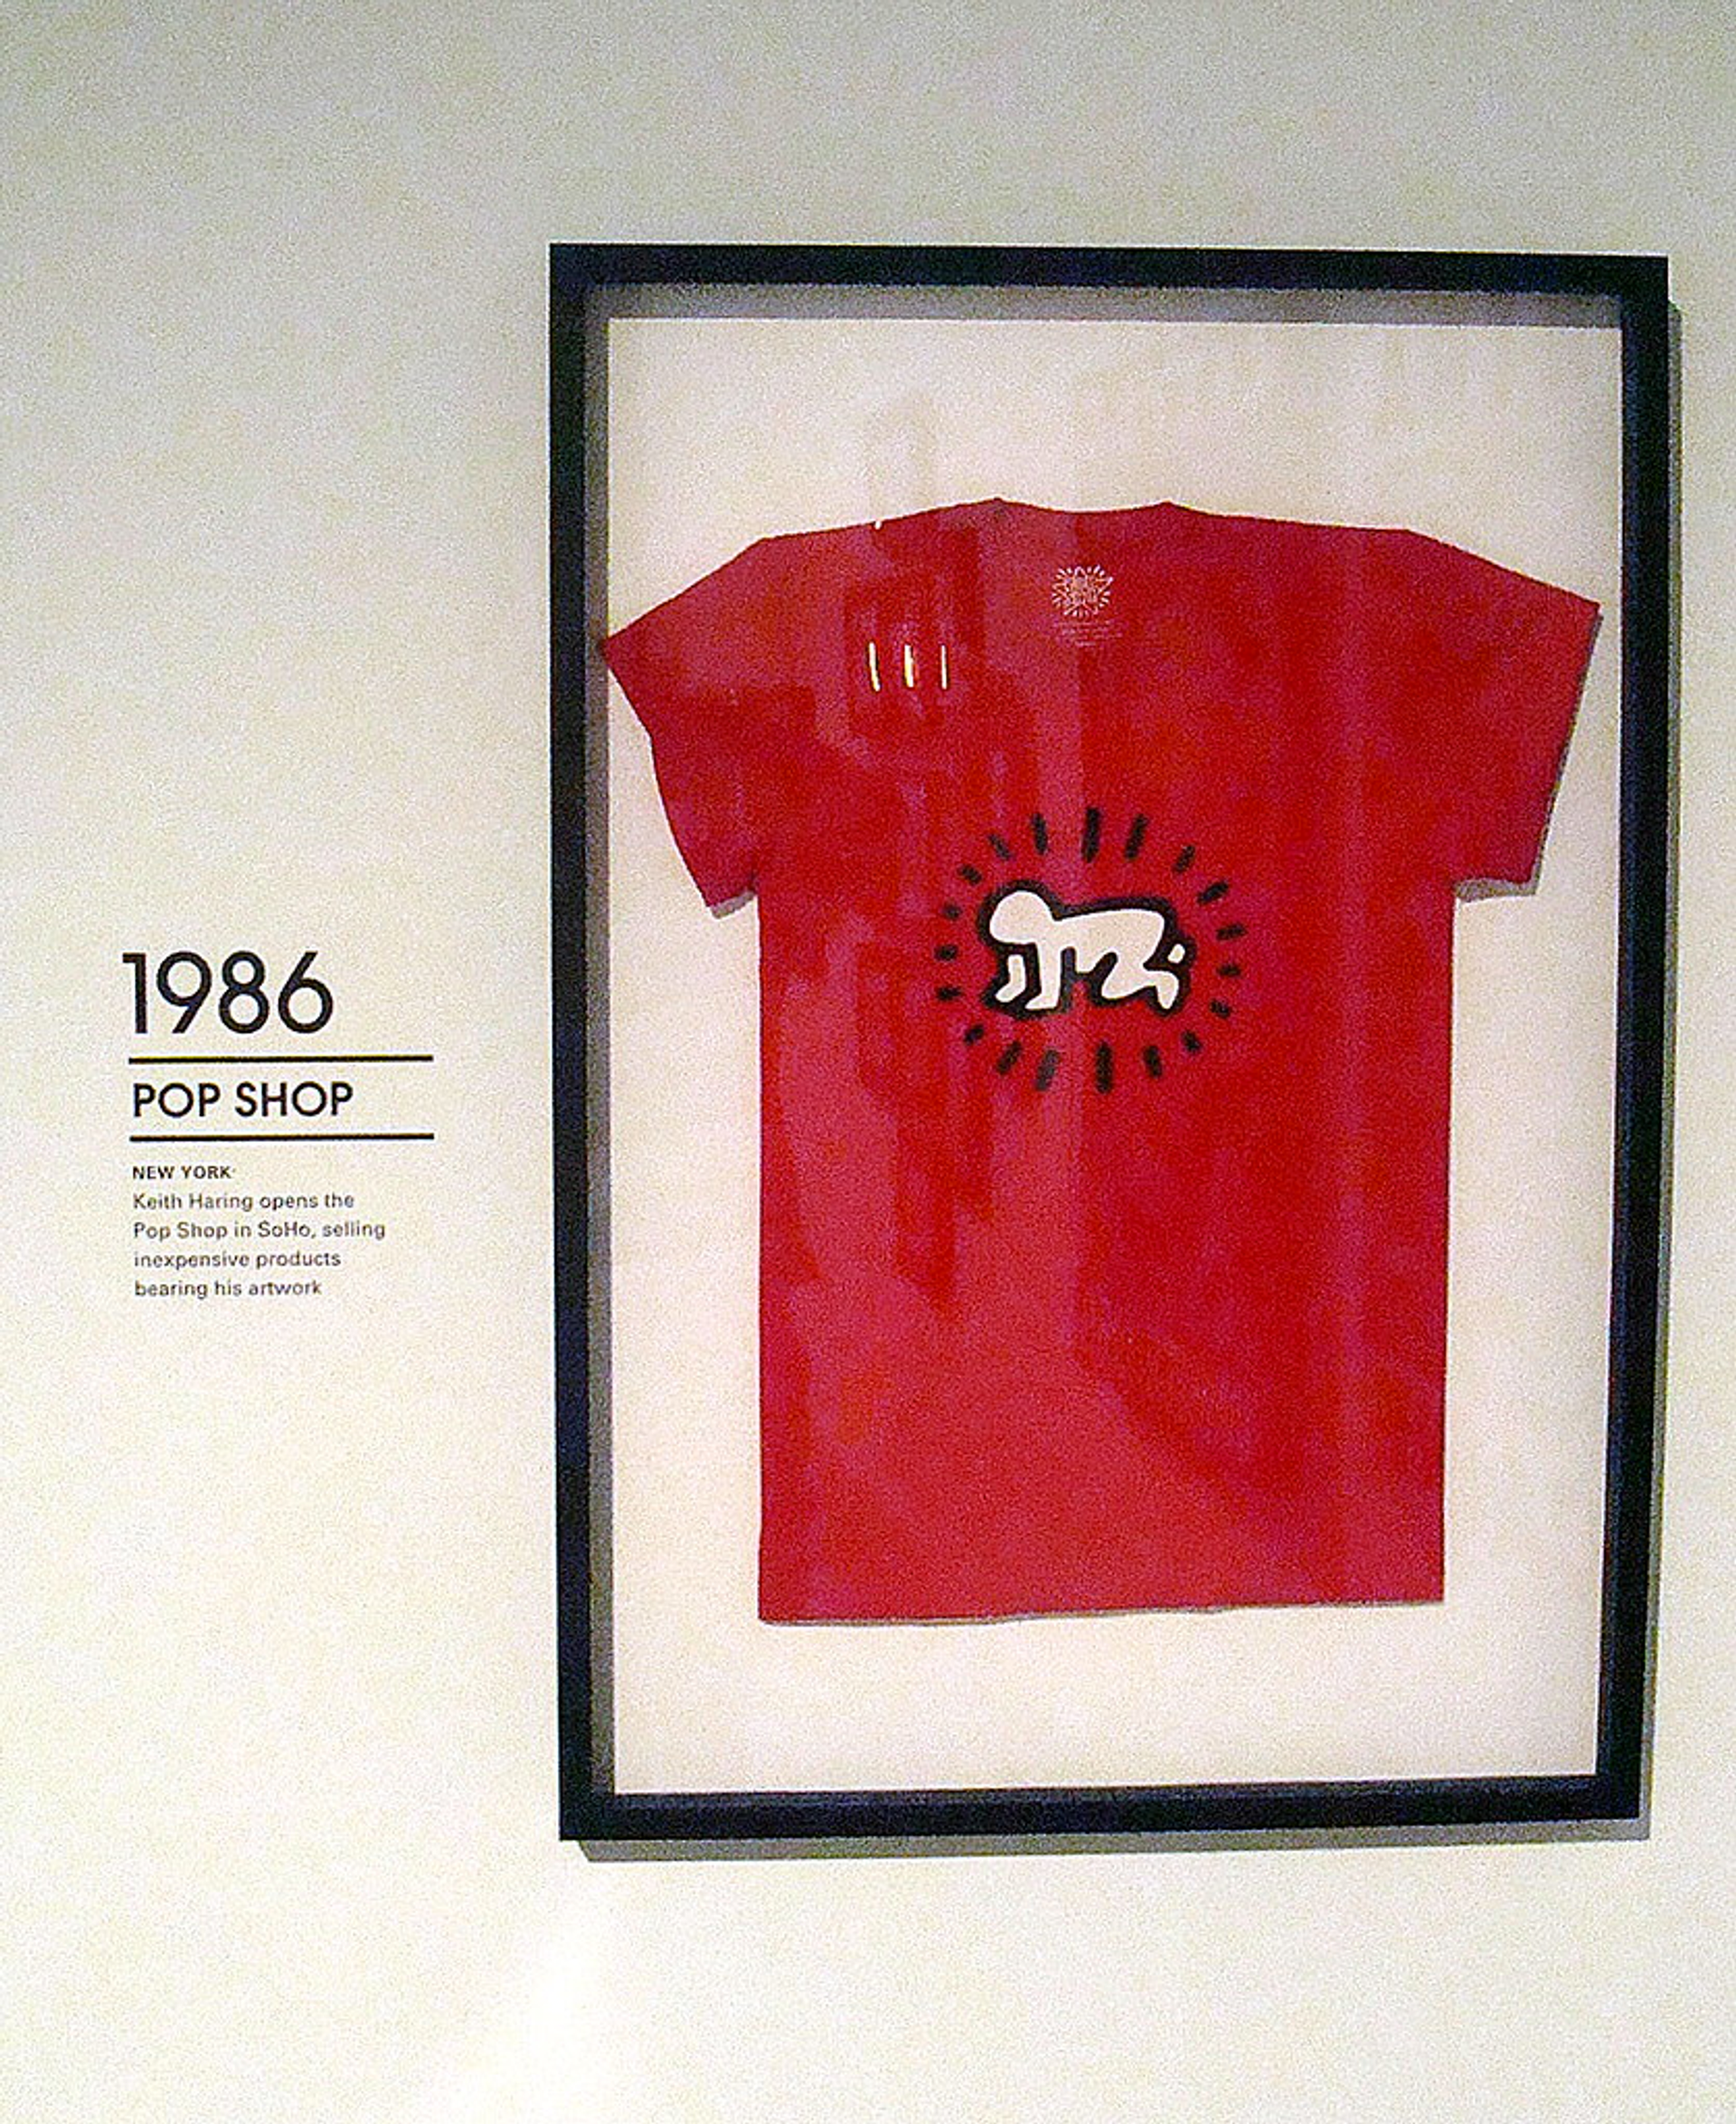 An image of one of Keith Haring's original Pop Shop designs.